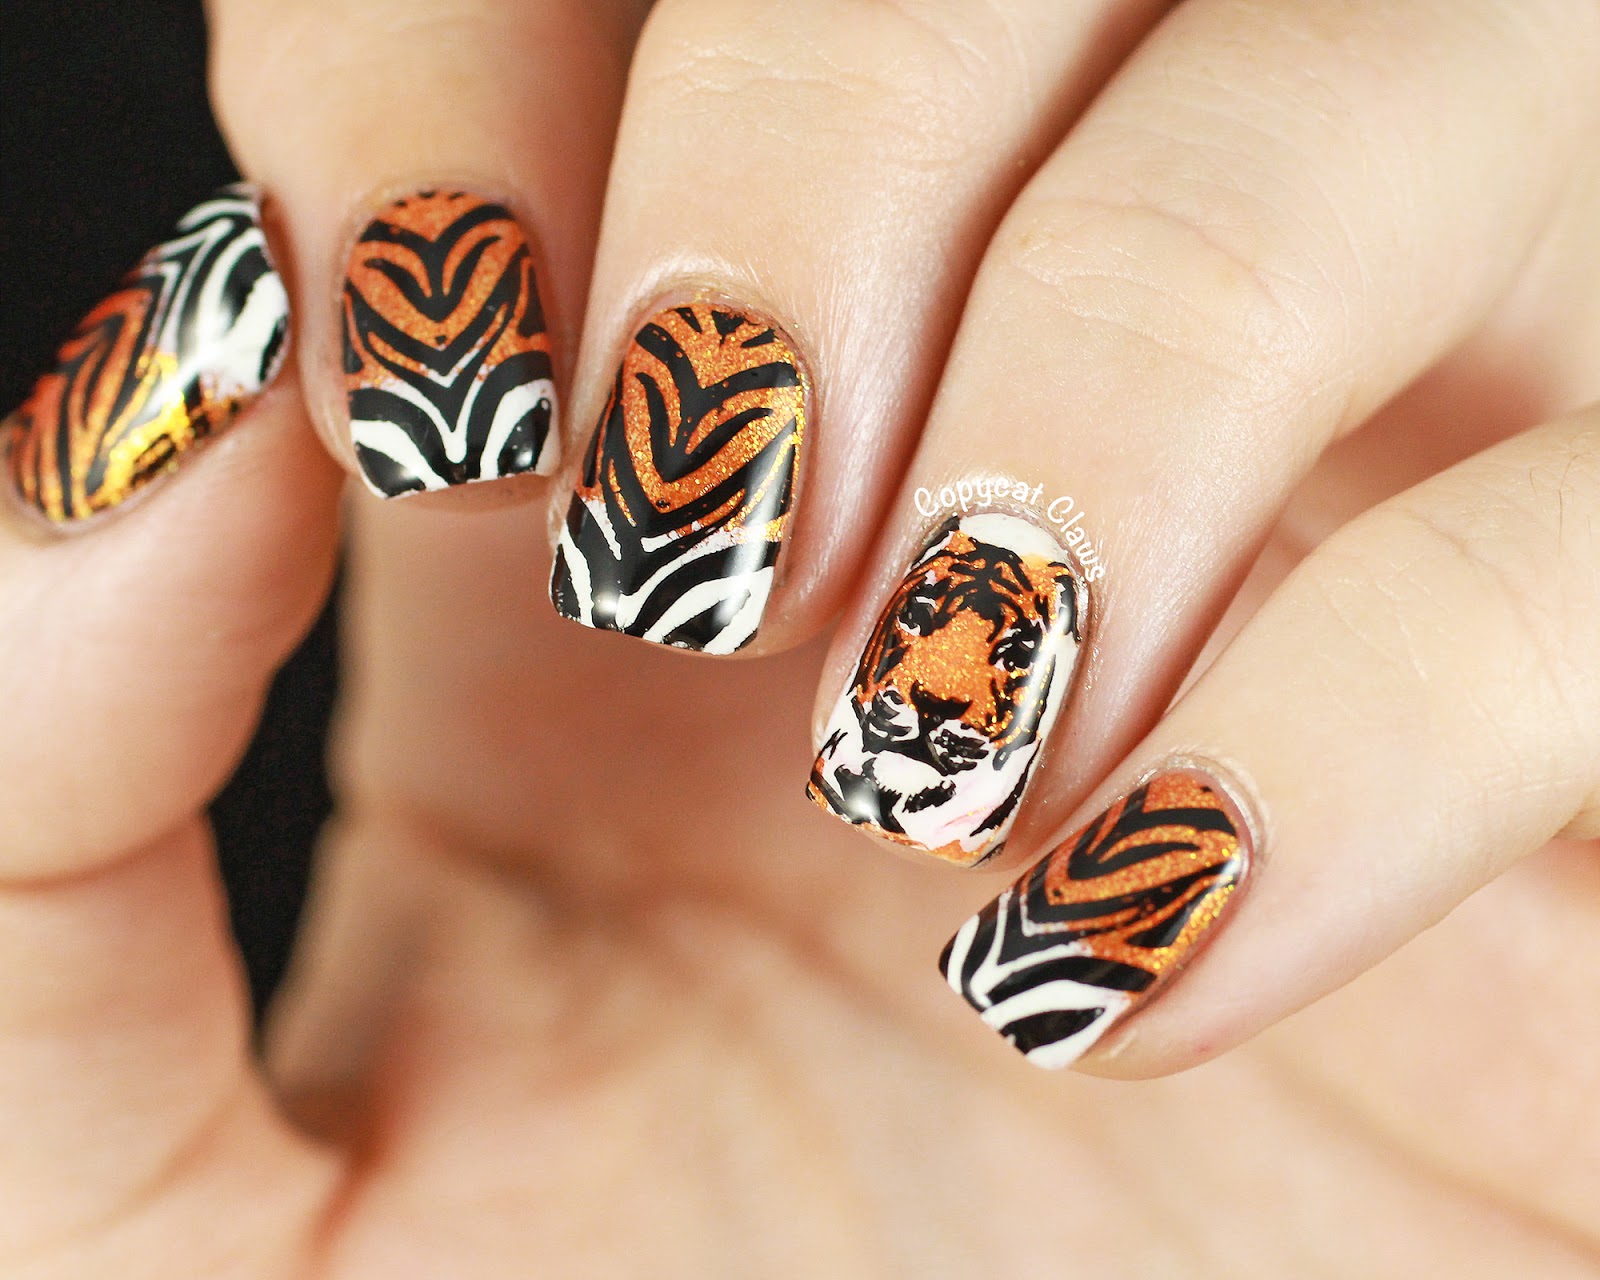 7. "Tiger Nail Art for Short Nails on Dailymotion" - wide 4